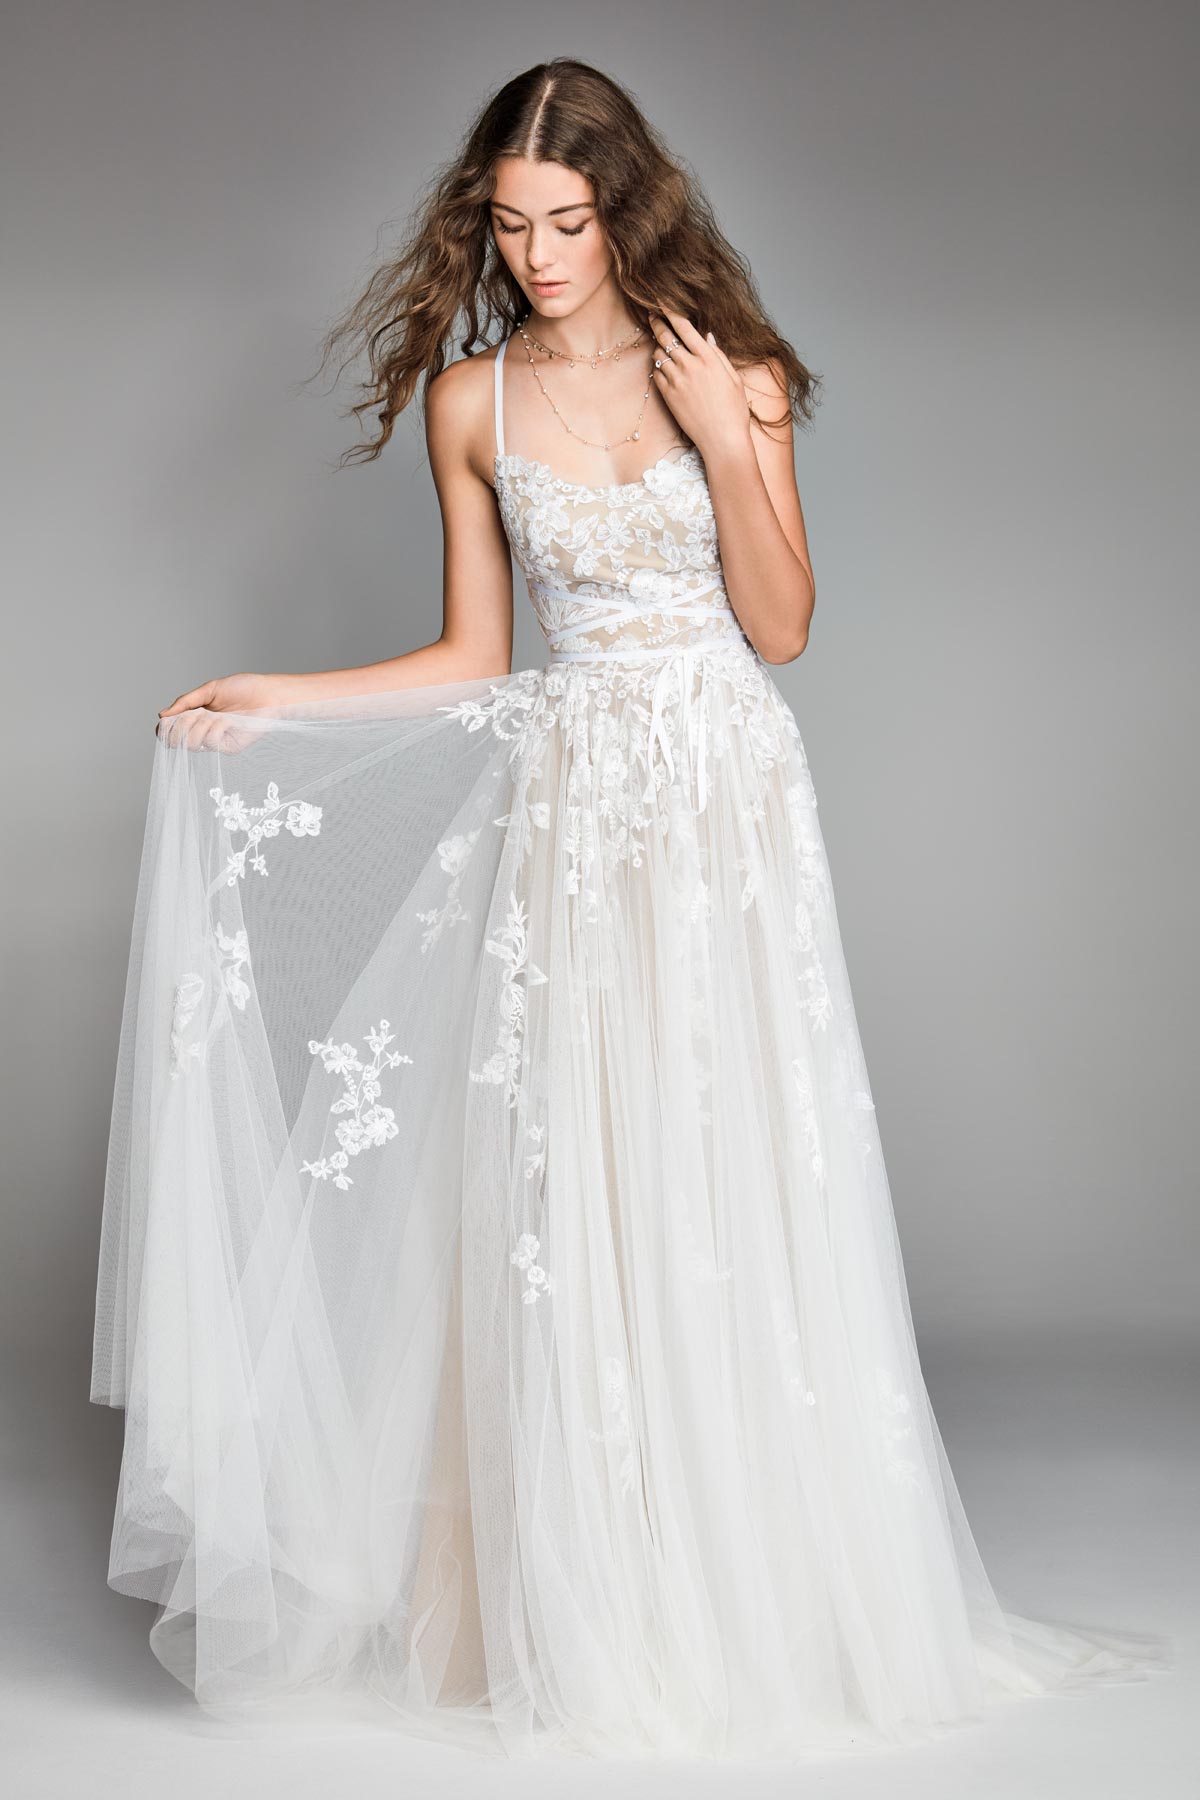 willow by watters wedding dress